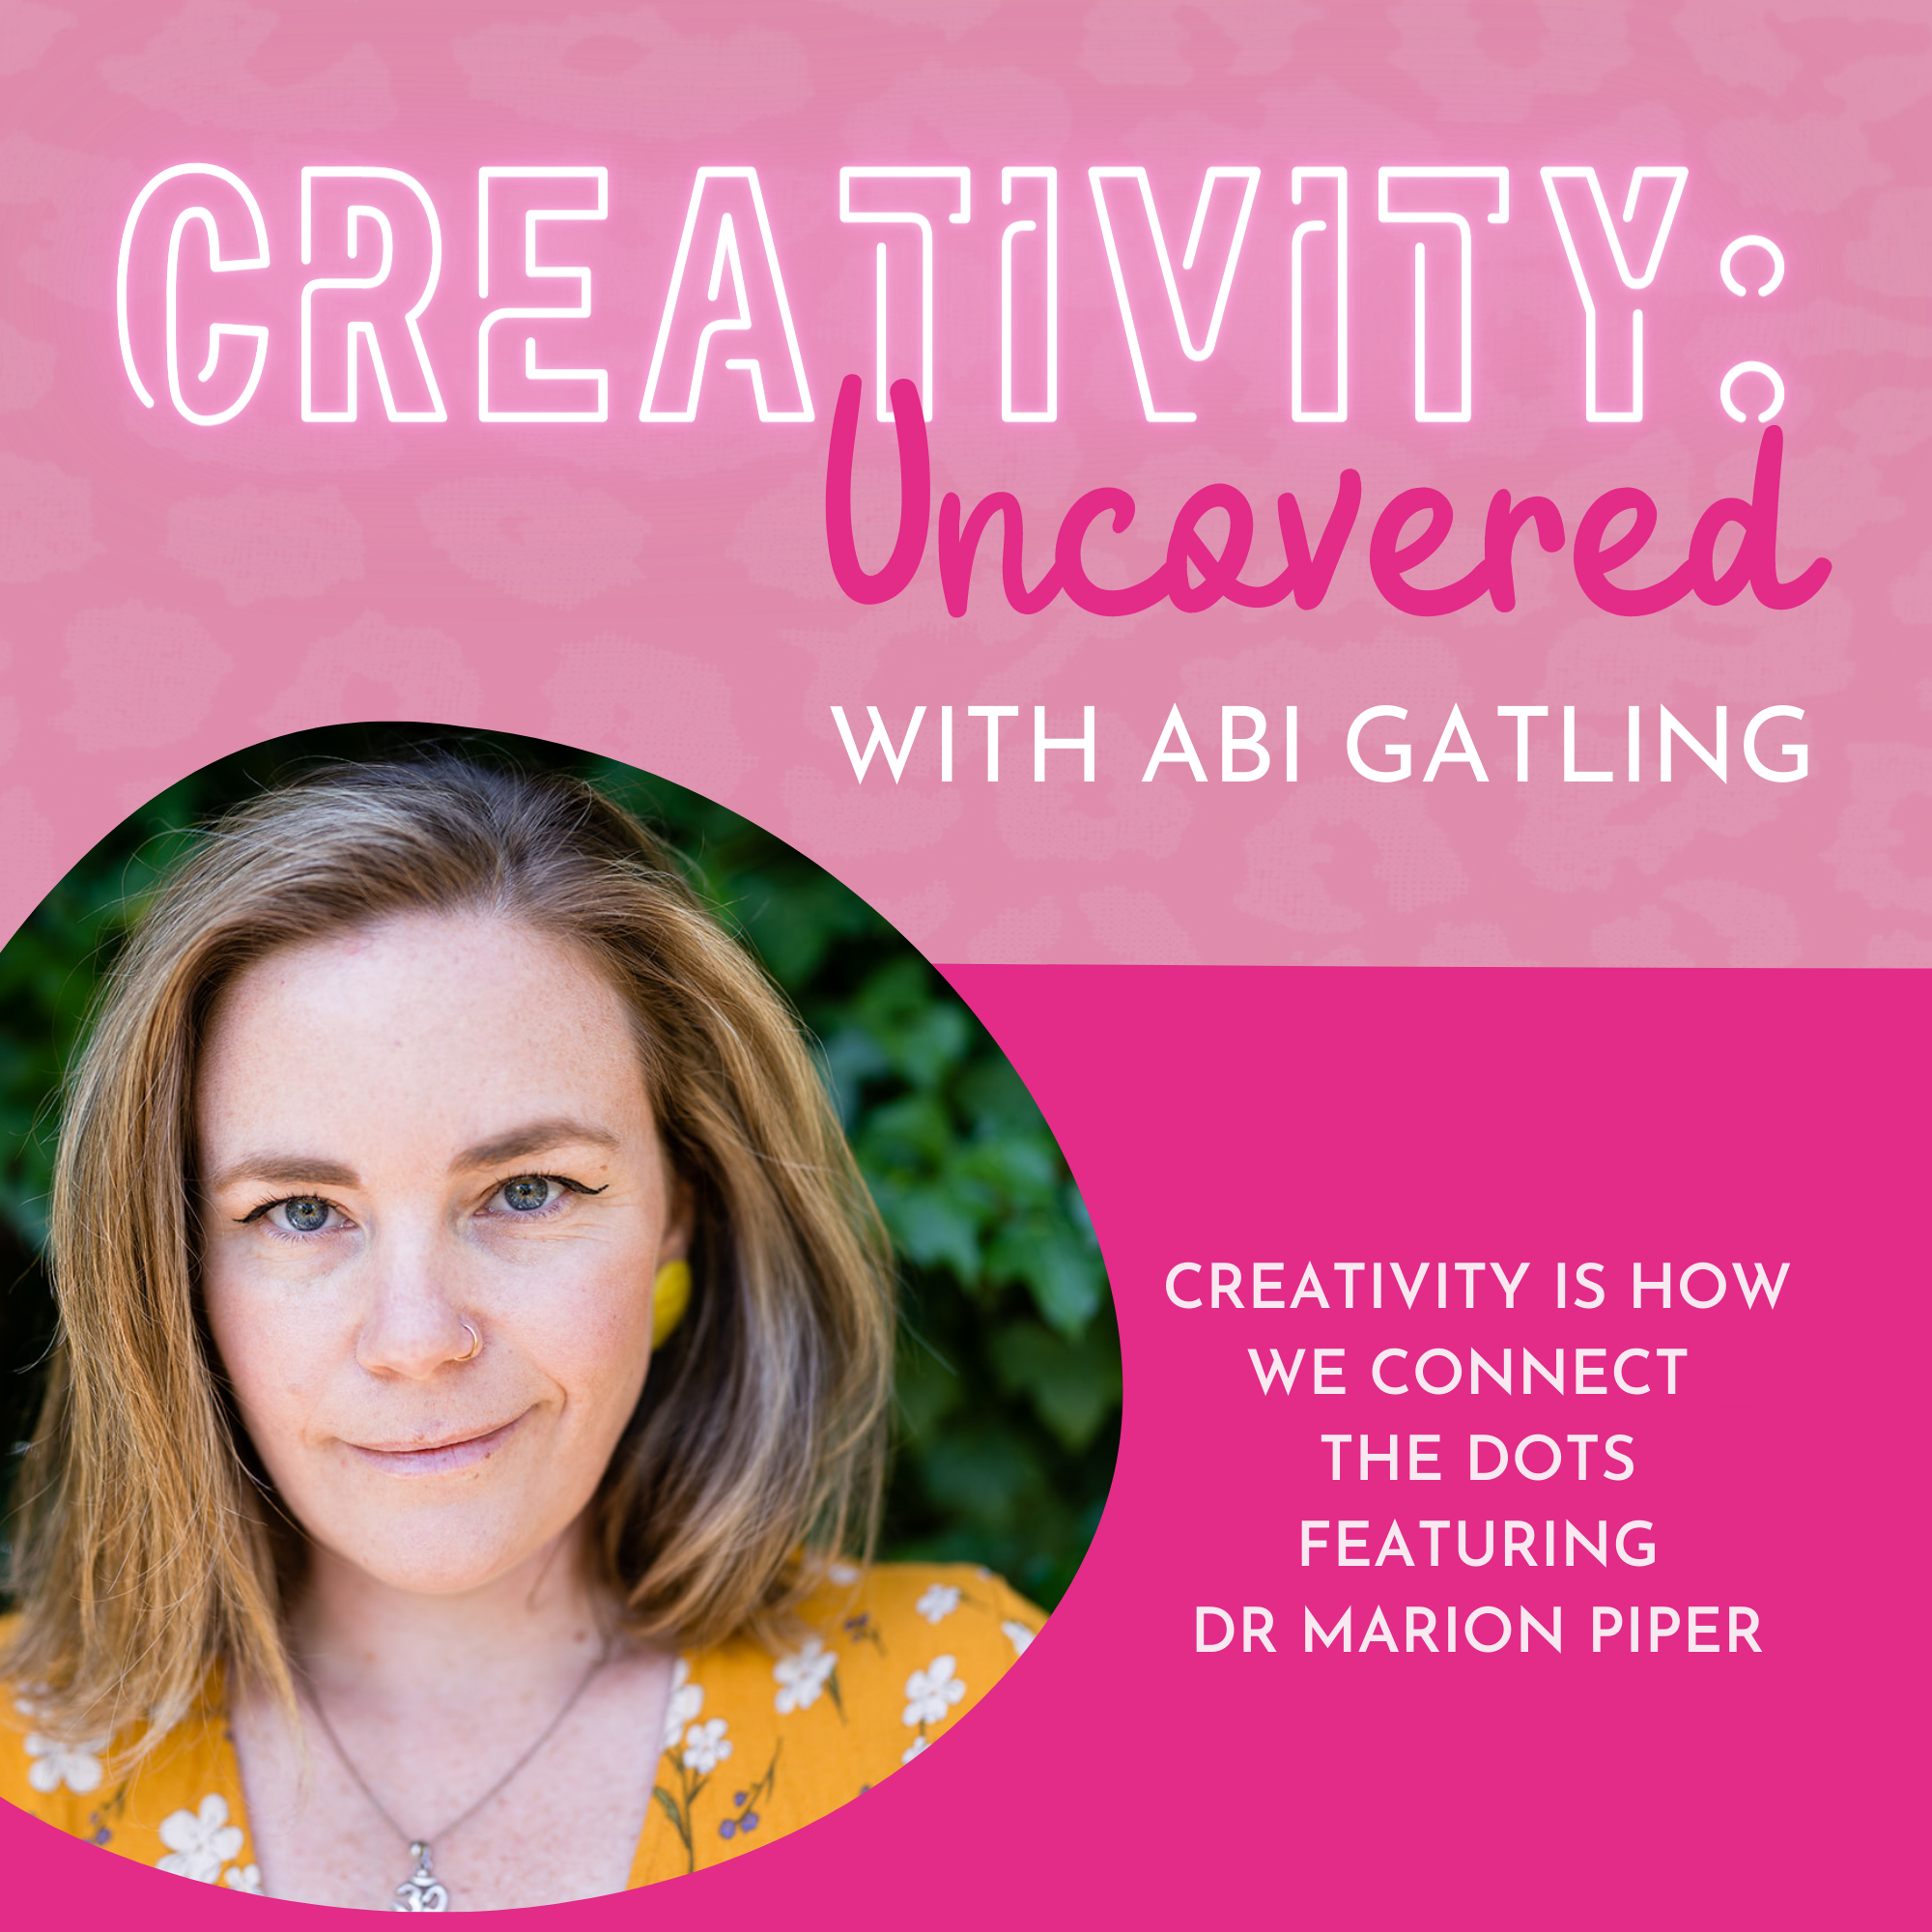 Creativity: Uncovered podcast episode graphic featuring guest Dr Marion Piper